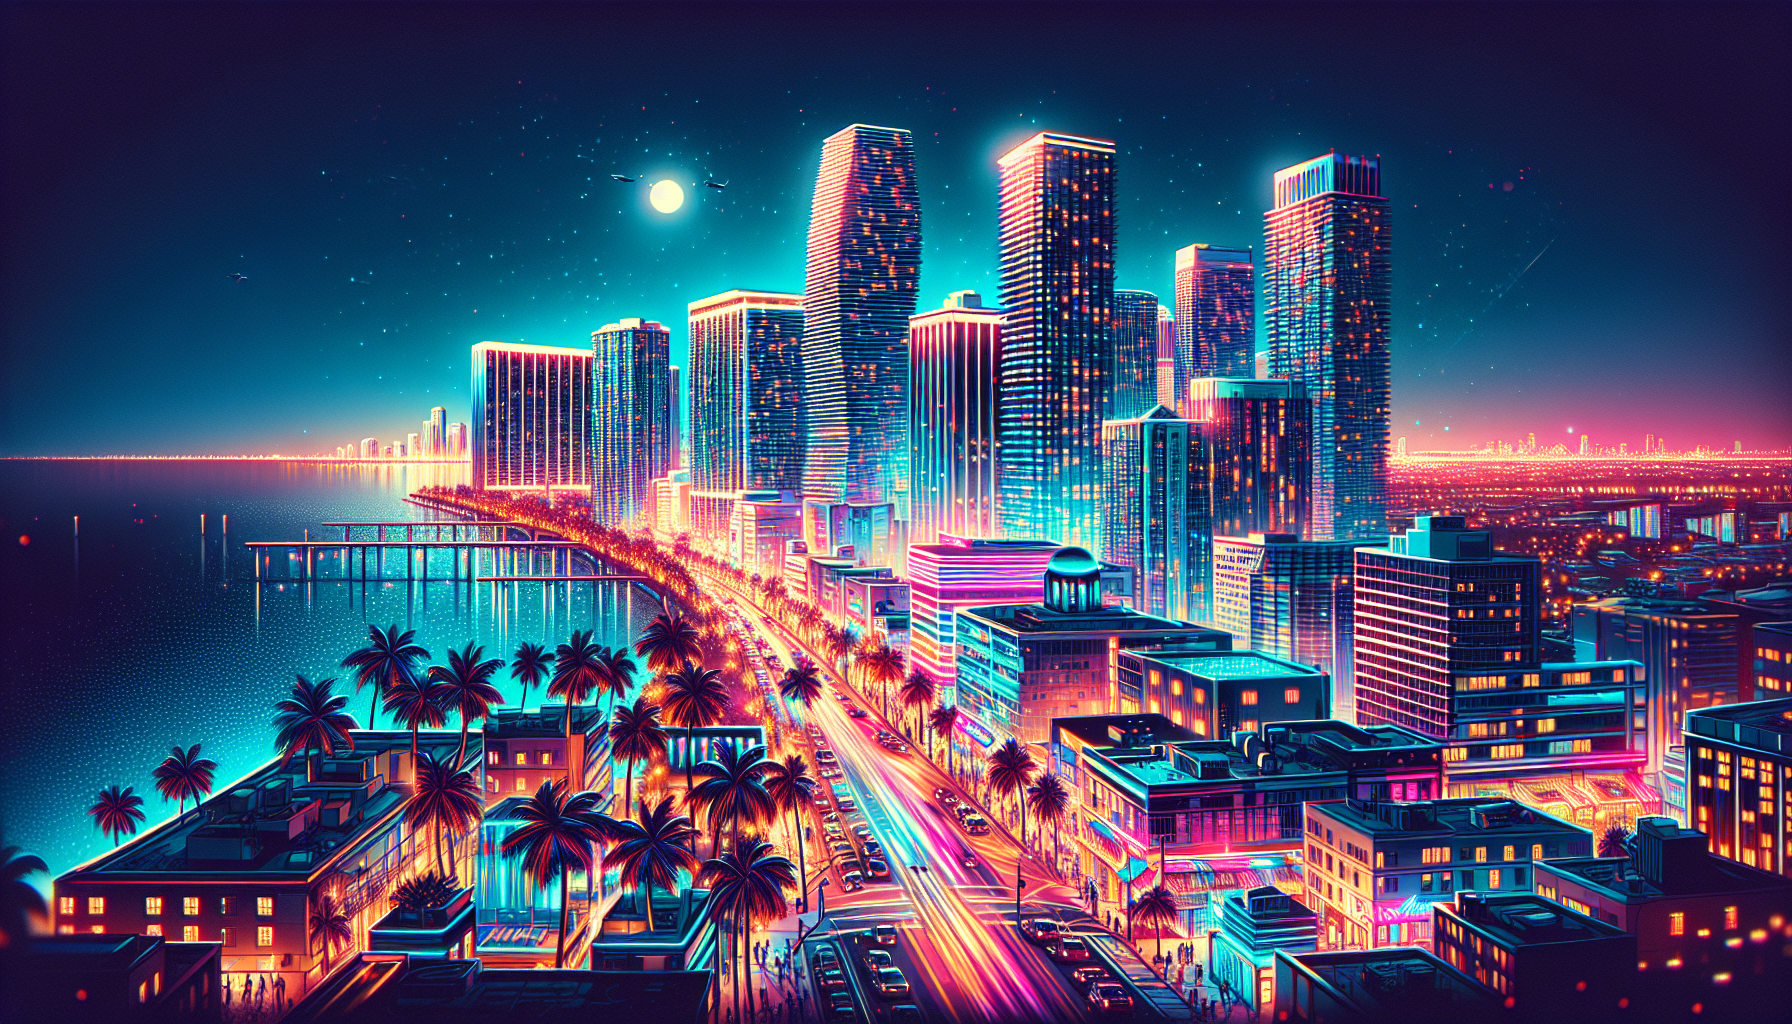 Illustration of Miami's vibrant nightlife during the conference